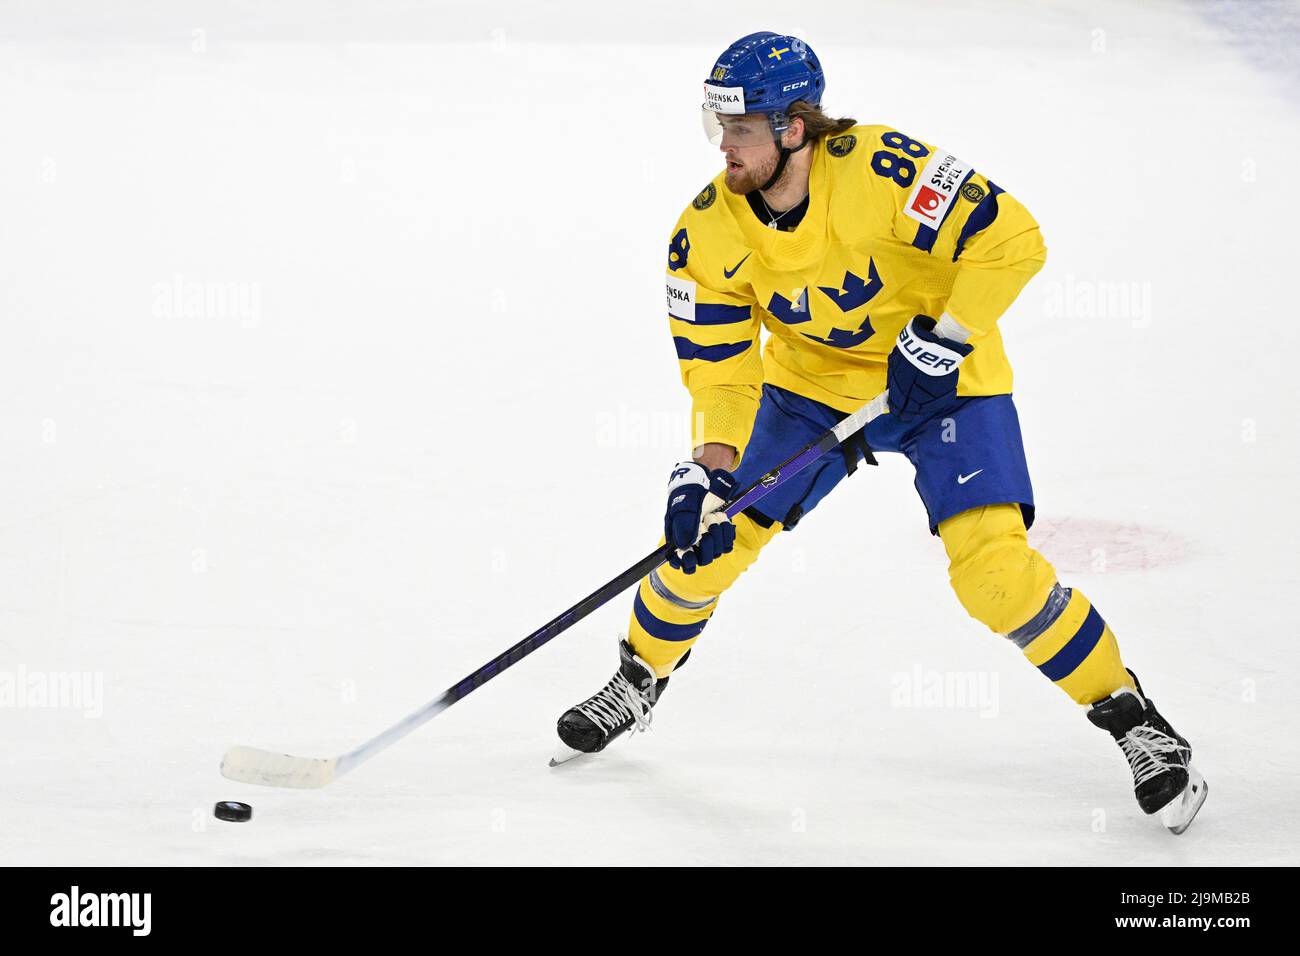 Tampere, Finland. 24th May, 2022. William Nylander of Sweden in action  during the Ice Hockey World Championship Group B match Latvia vs. Sweden in  Tampere, Finland, May 24, 2022. Credit: Michal Kamaryt/CTK